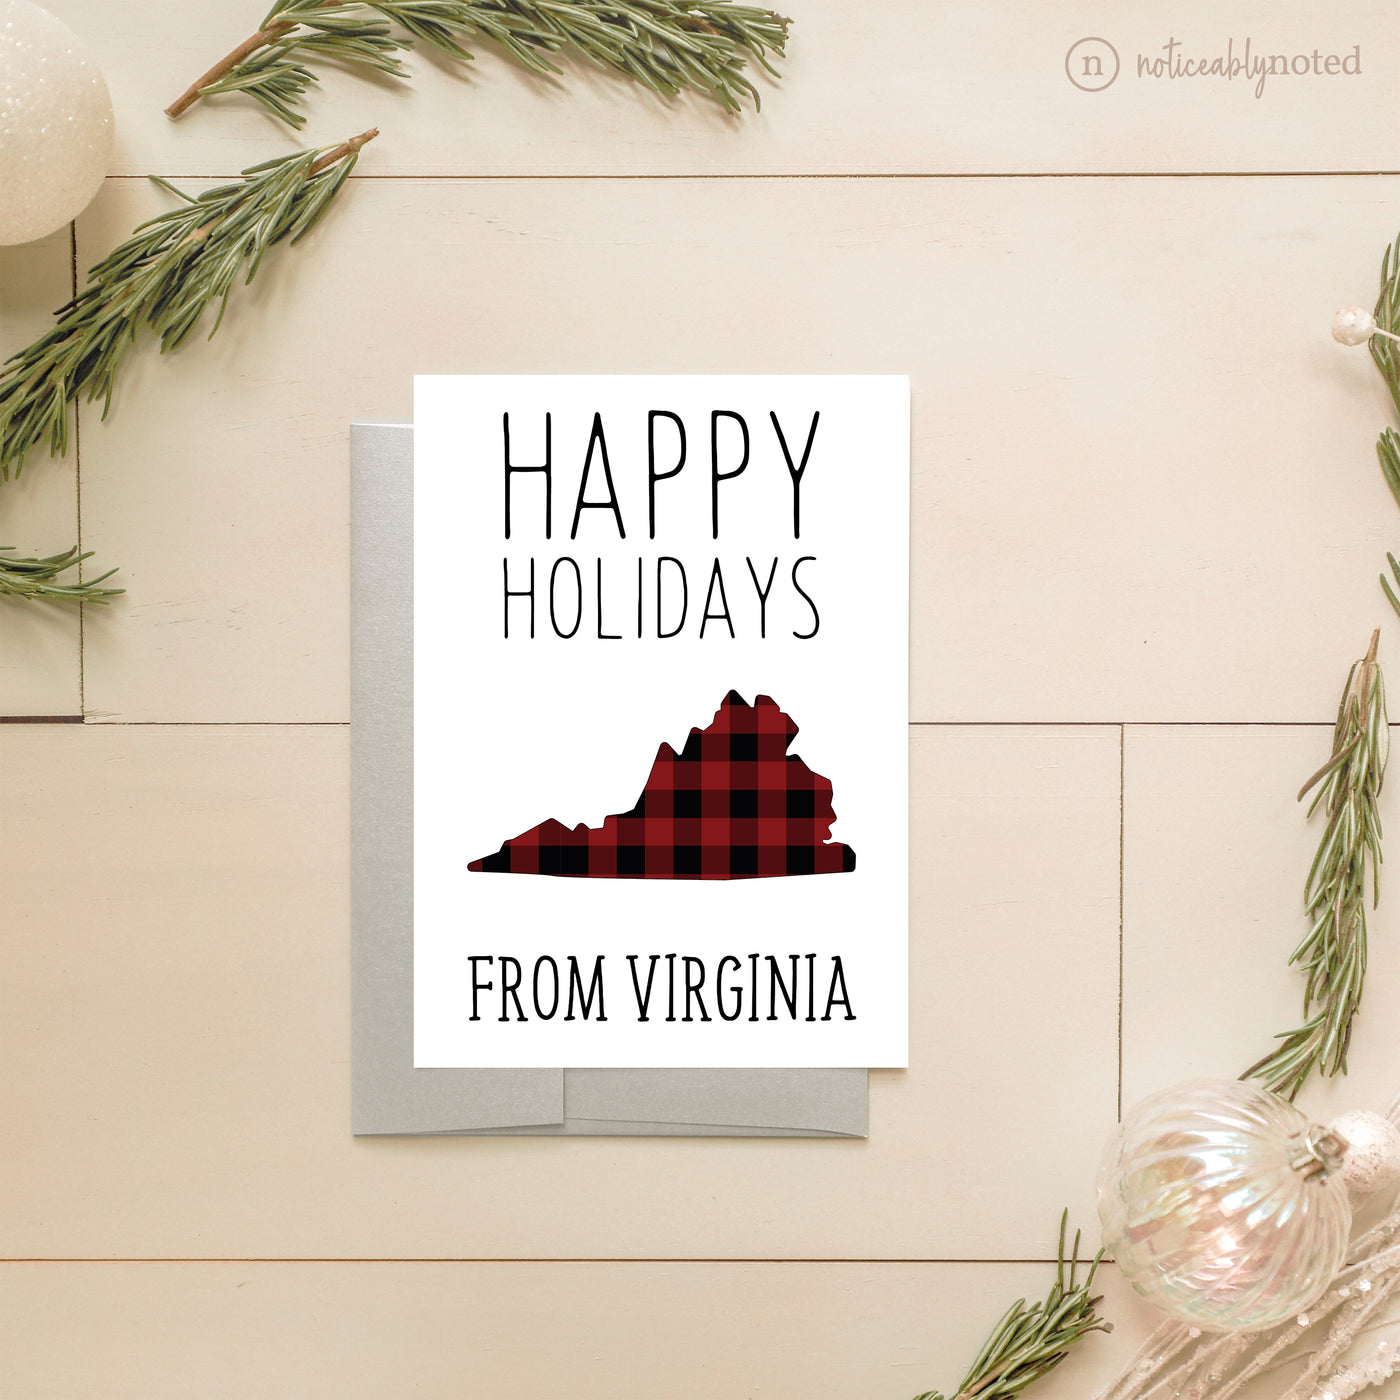 Virginia Holiday Card - Happy Holidays | Noticeably Noted